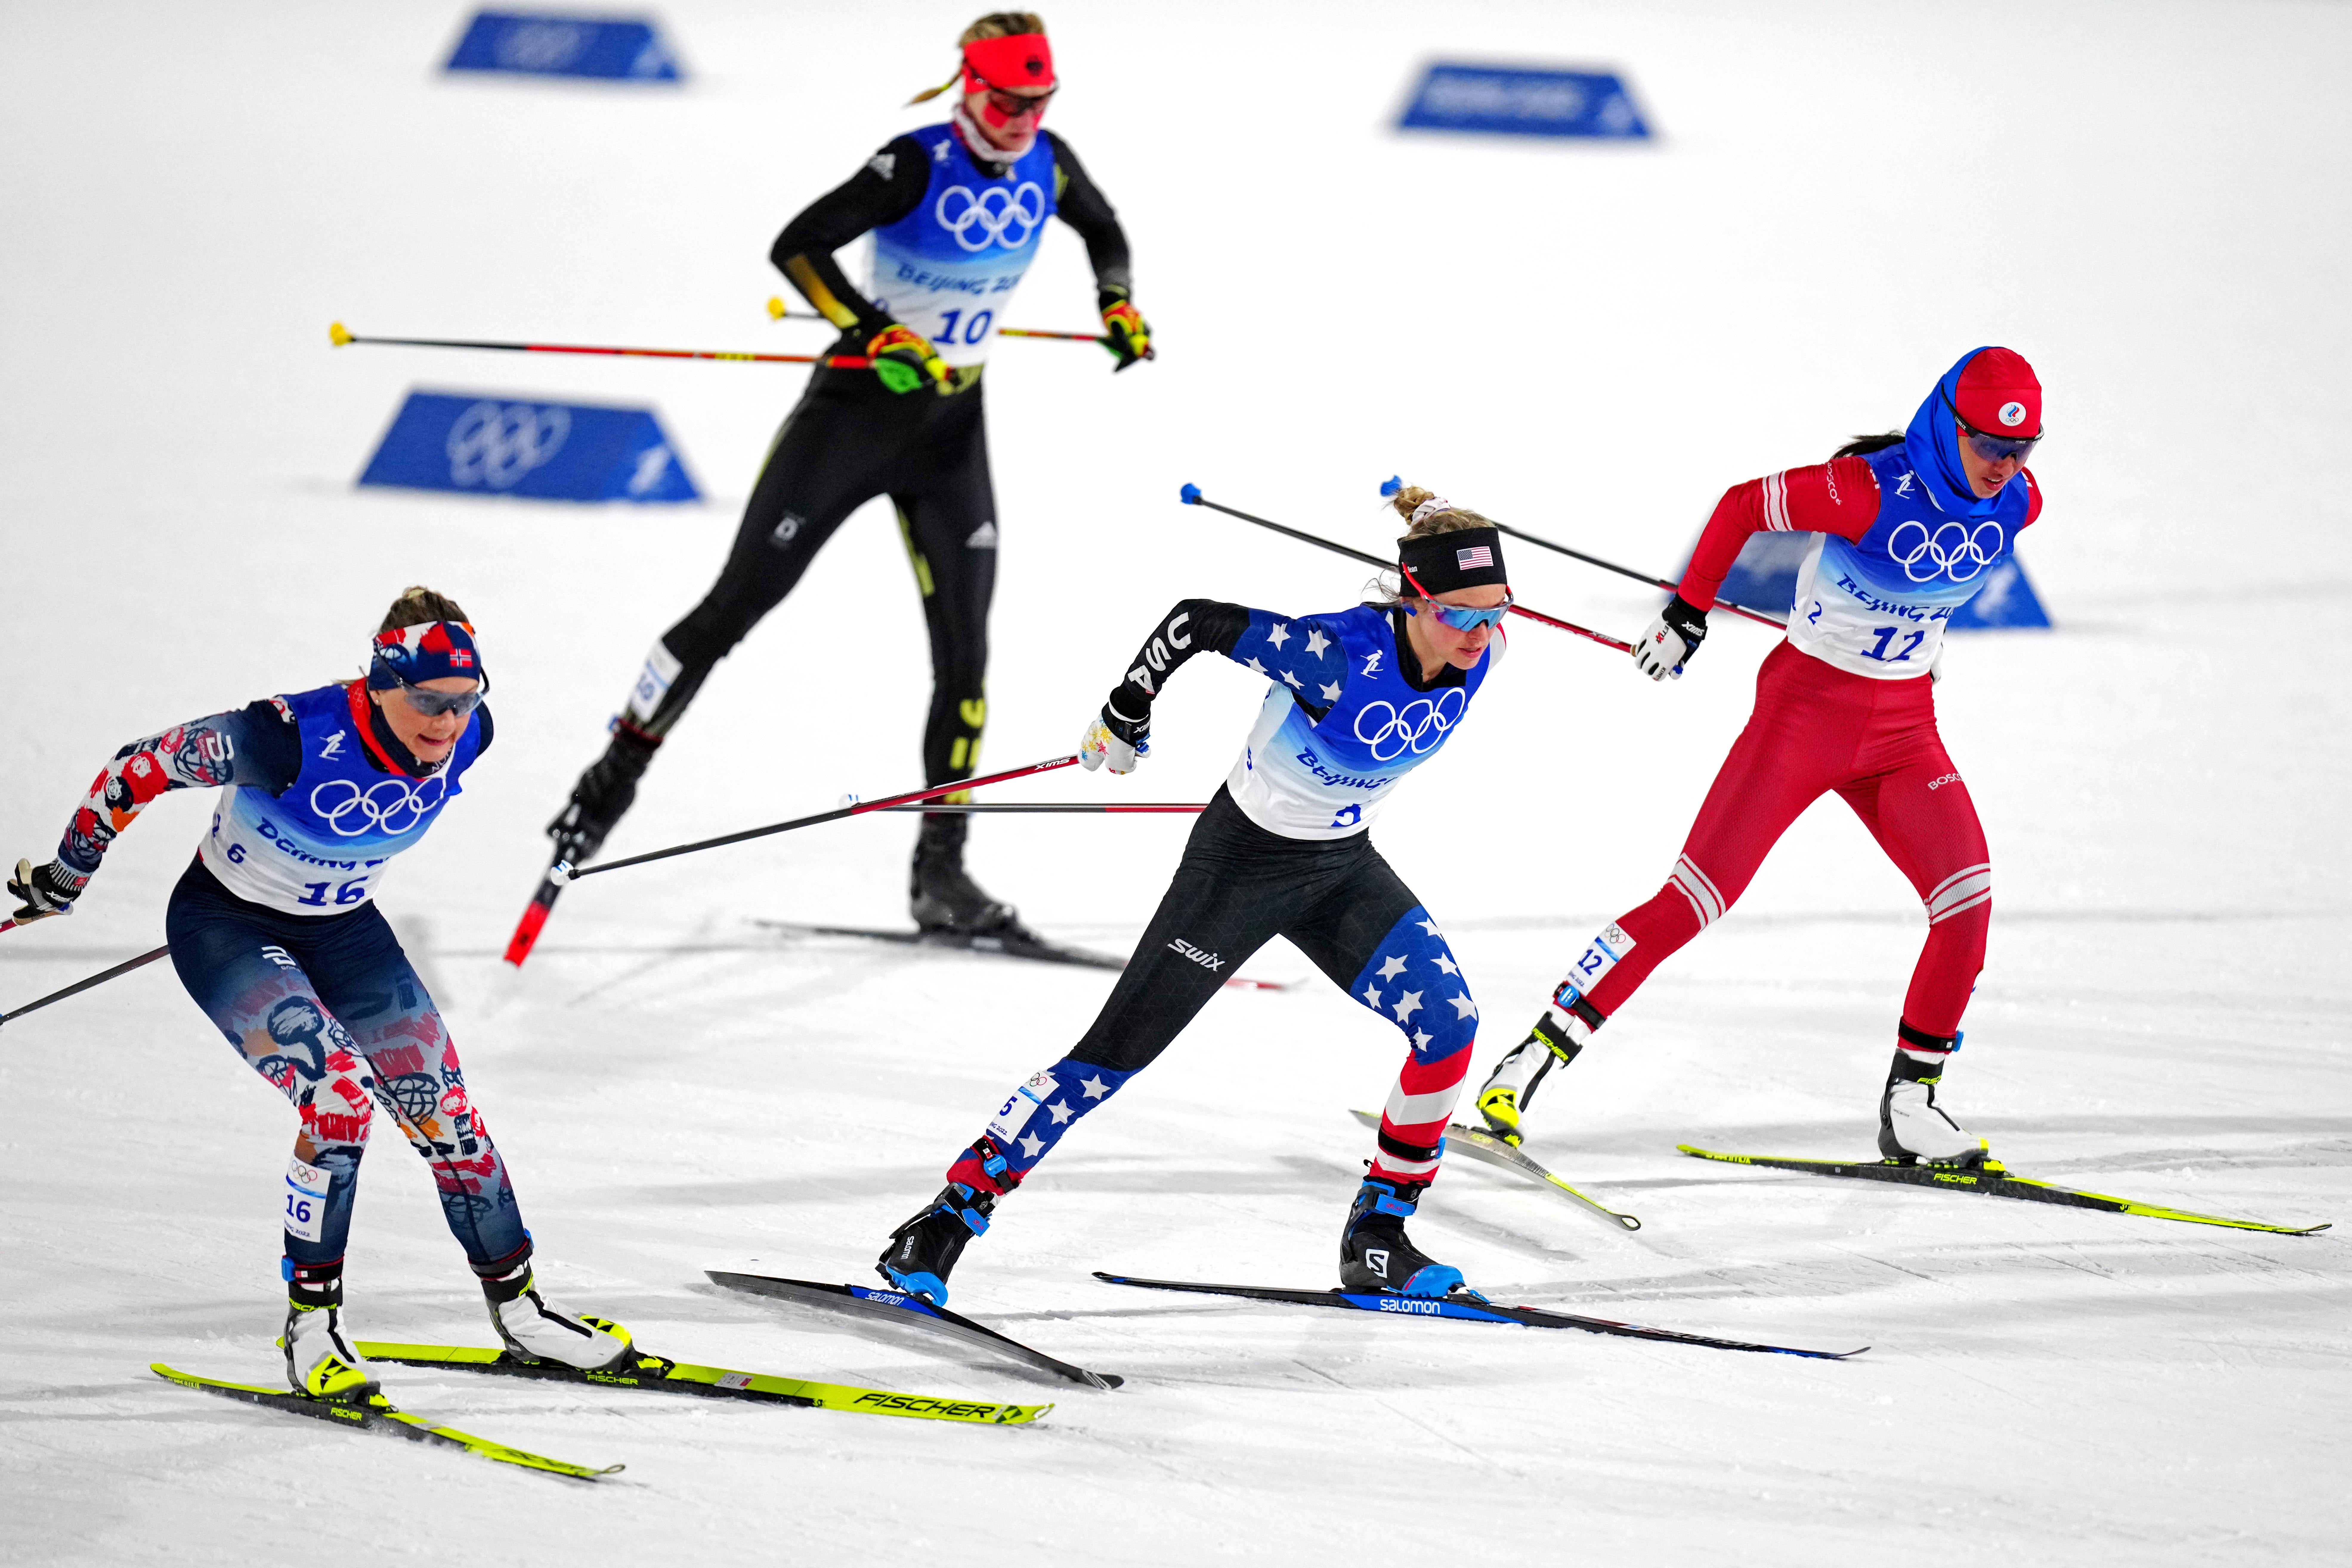 Jessie Diggins makes history at the Winter Olympics in Beijing: See photos of her win